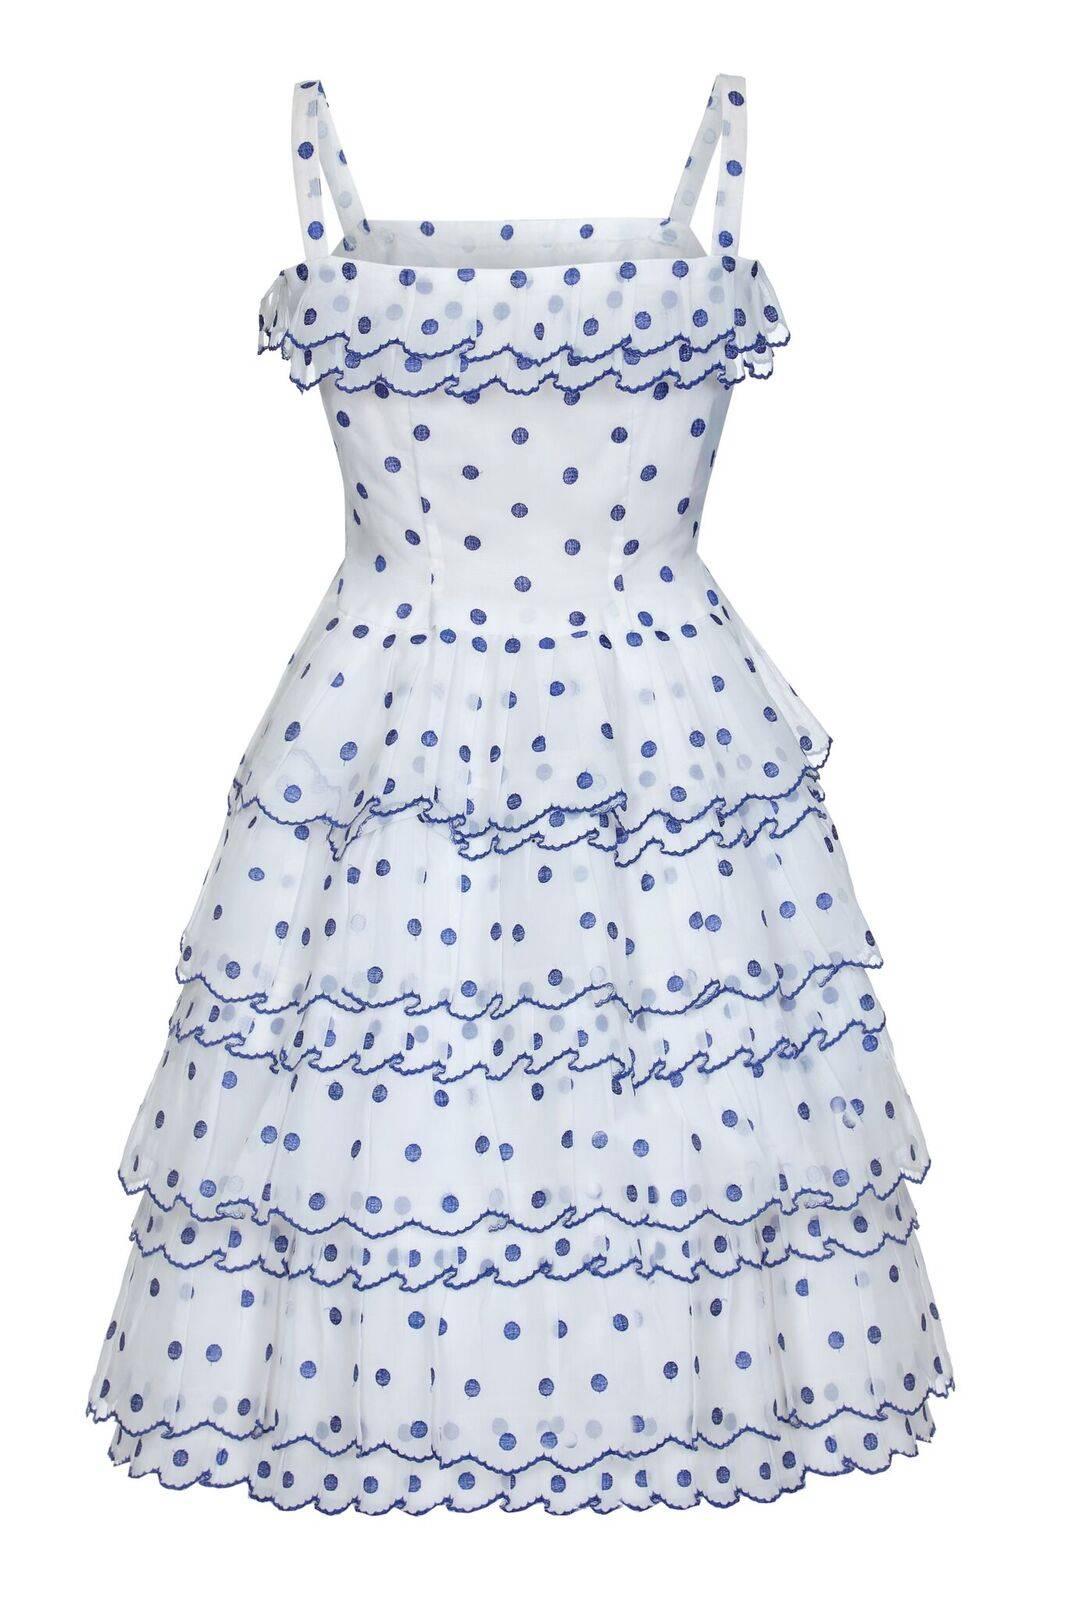 This charming vintage French couture dress in white and blue polkadot organza is beautifully constructed and a perfect Summer occasion piece. There is a 